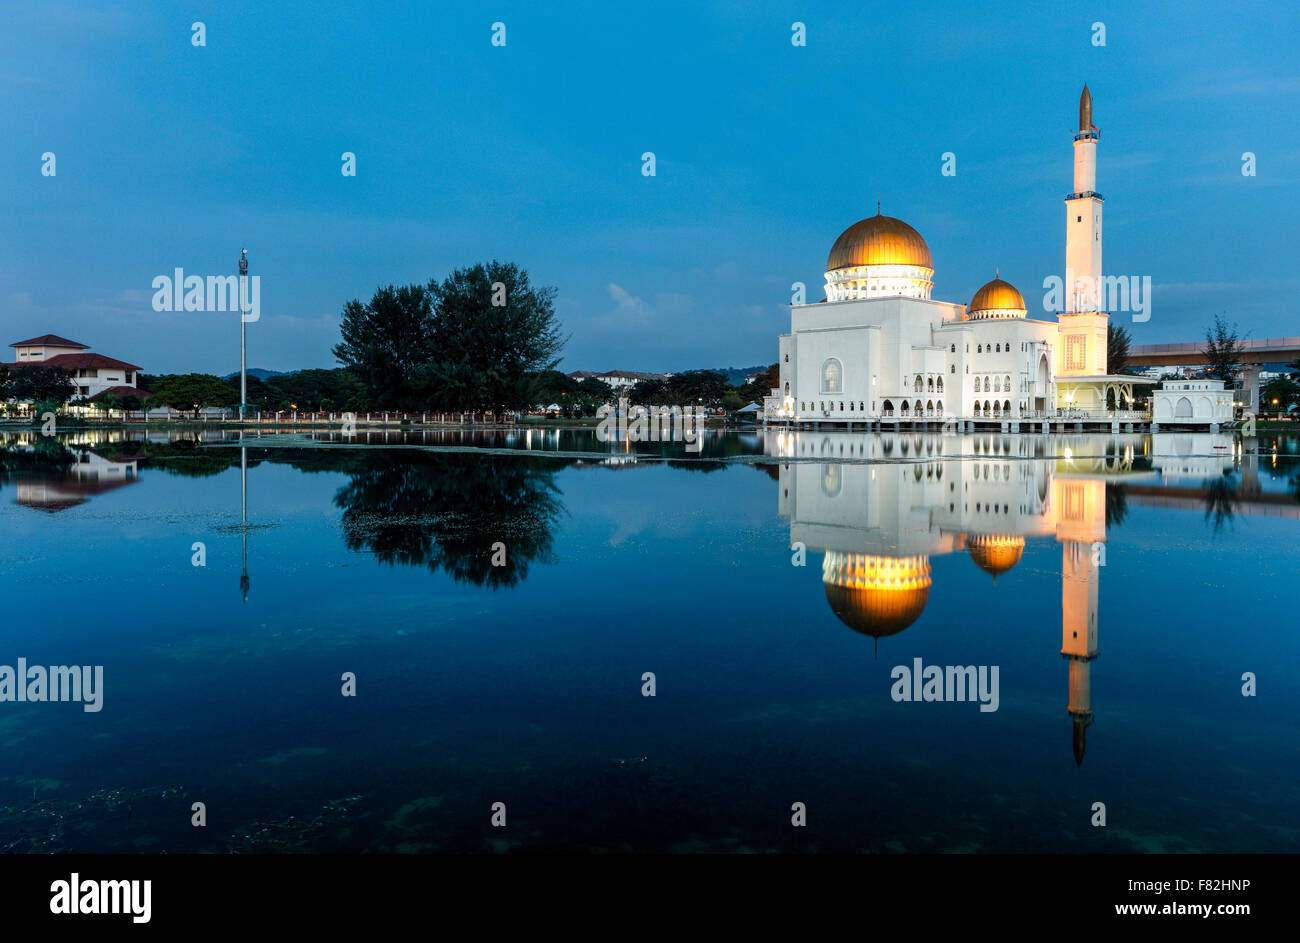 The As Salam Mosque in Puchong, Malaysia during the blue hours of twilight. Stock Photo